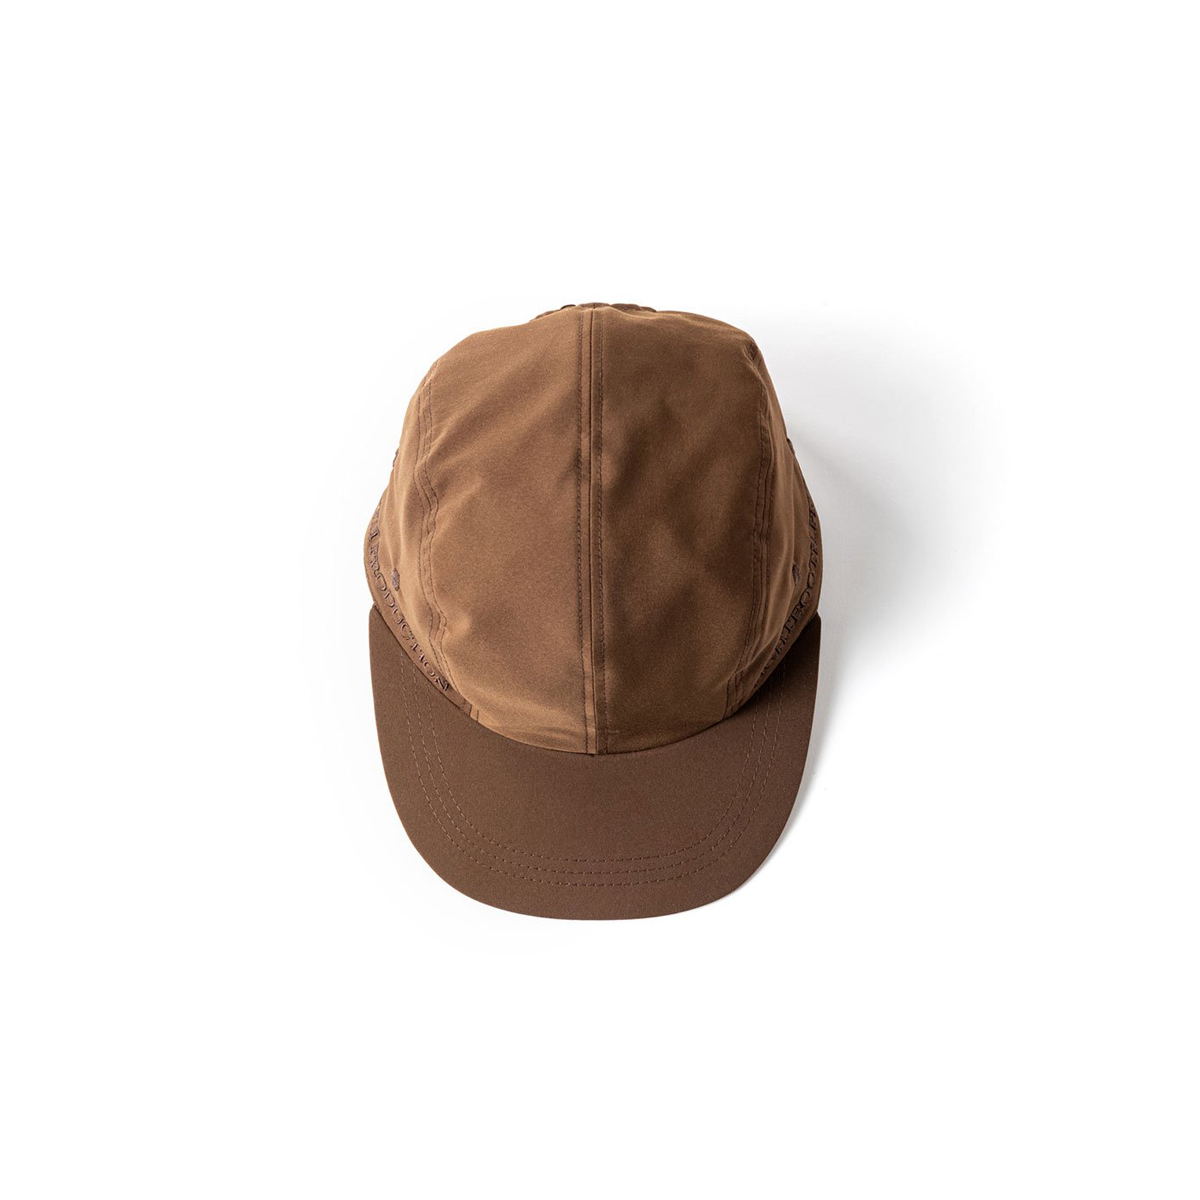 TIGHTBOOTH - Side Logo Camp Cap - 3 Colors